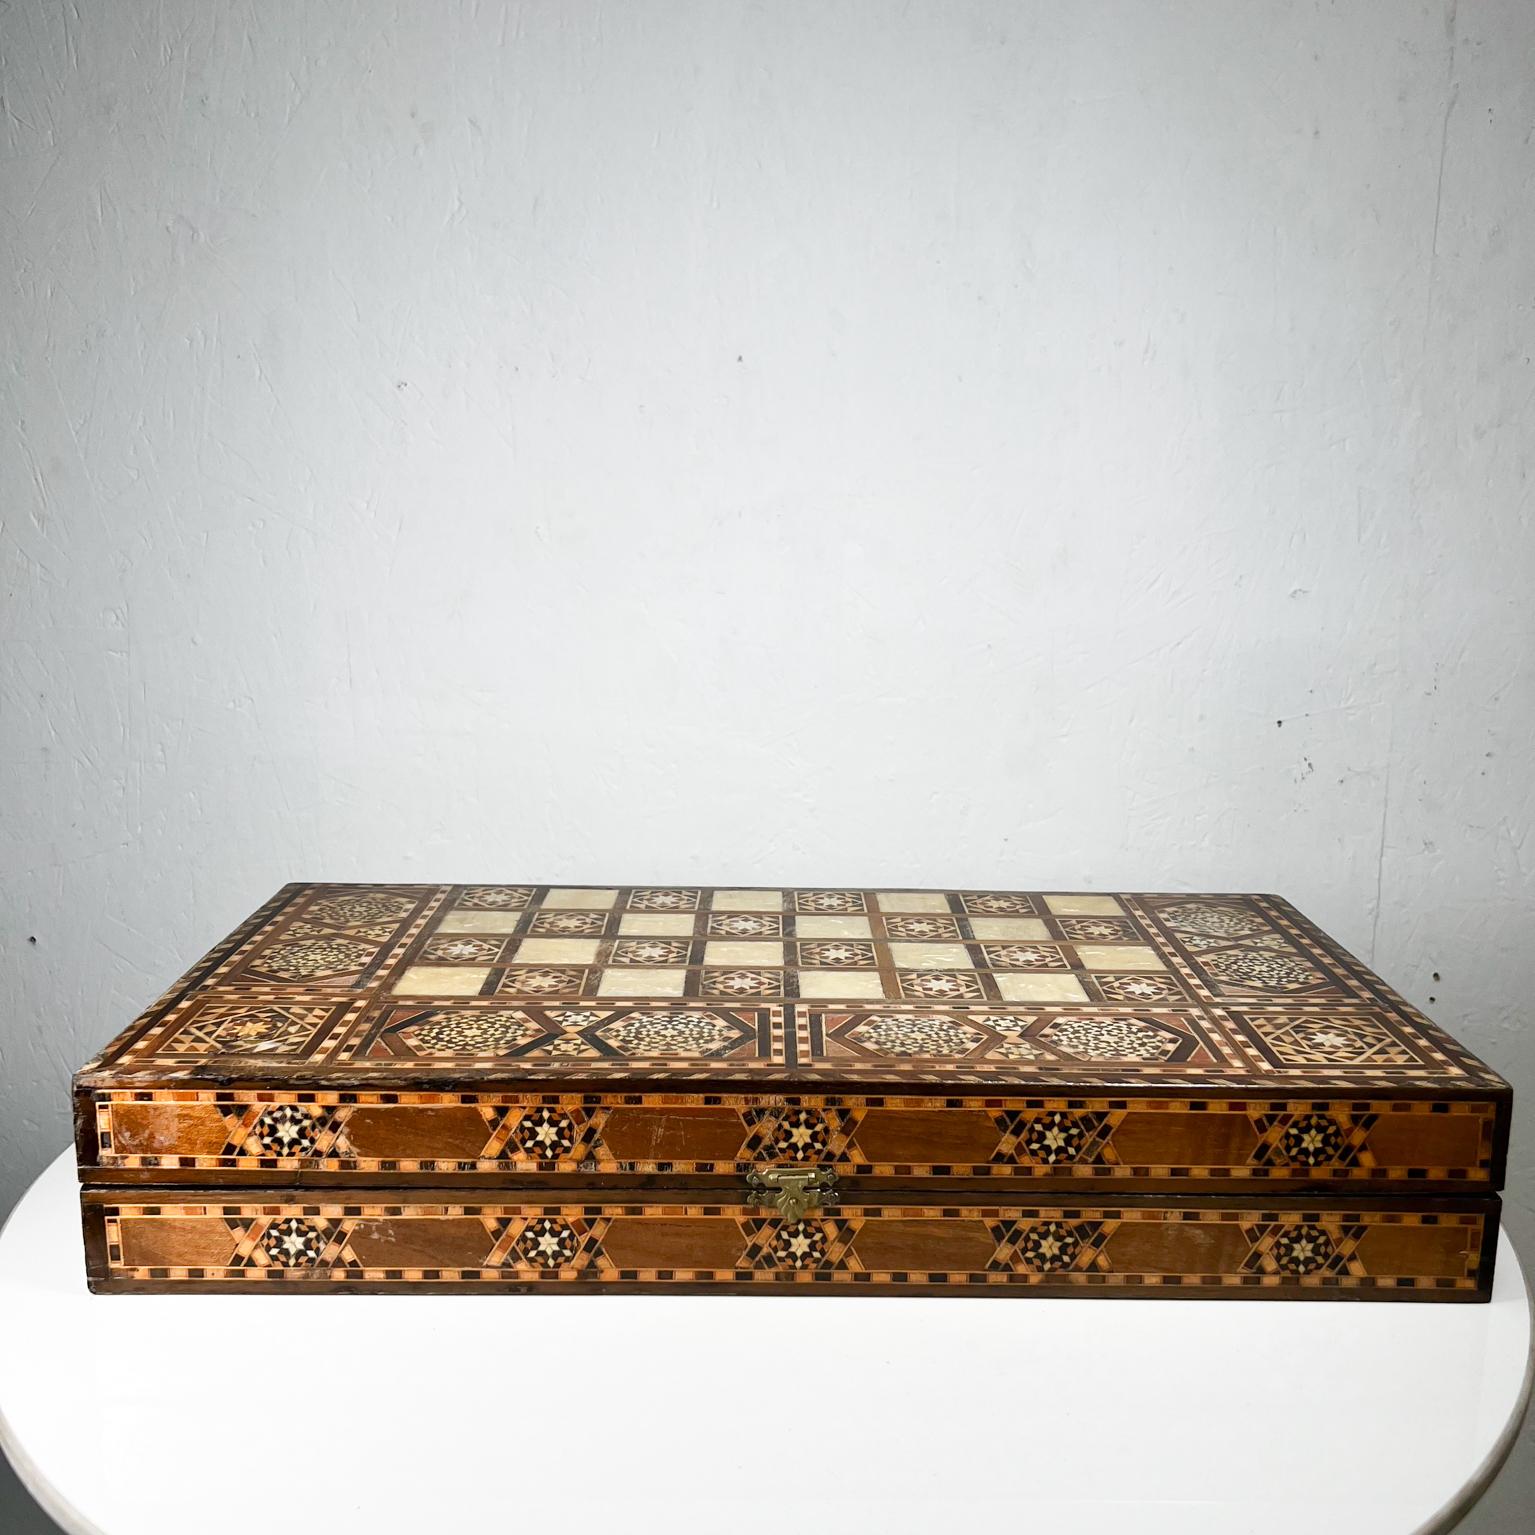 Vintage backgammon game board chess box intricate mosaic wood marquetry inlaid Mop
Measures: 19.63 x 9.88 deep x 3.13 tall, open 19.34 x 19.63 x 1.63
Preowned original vintage condition. Wear present.
No pieces are included.
Review all images